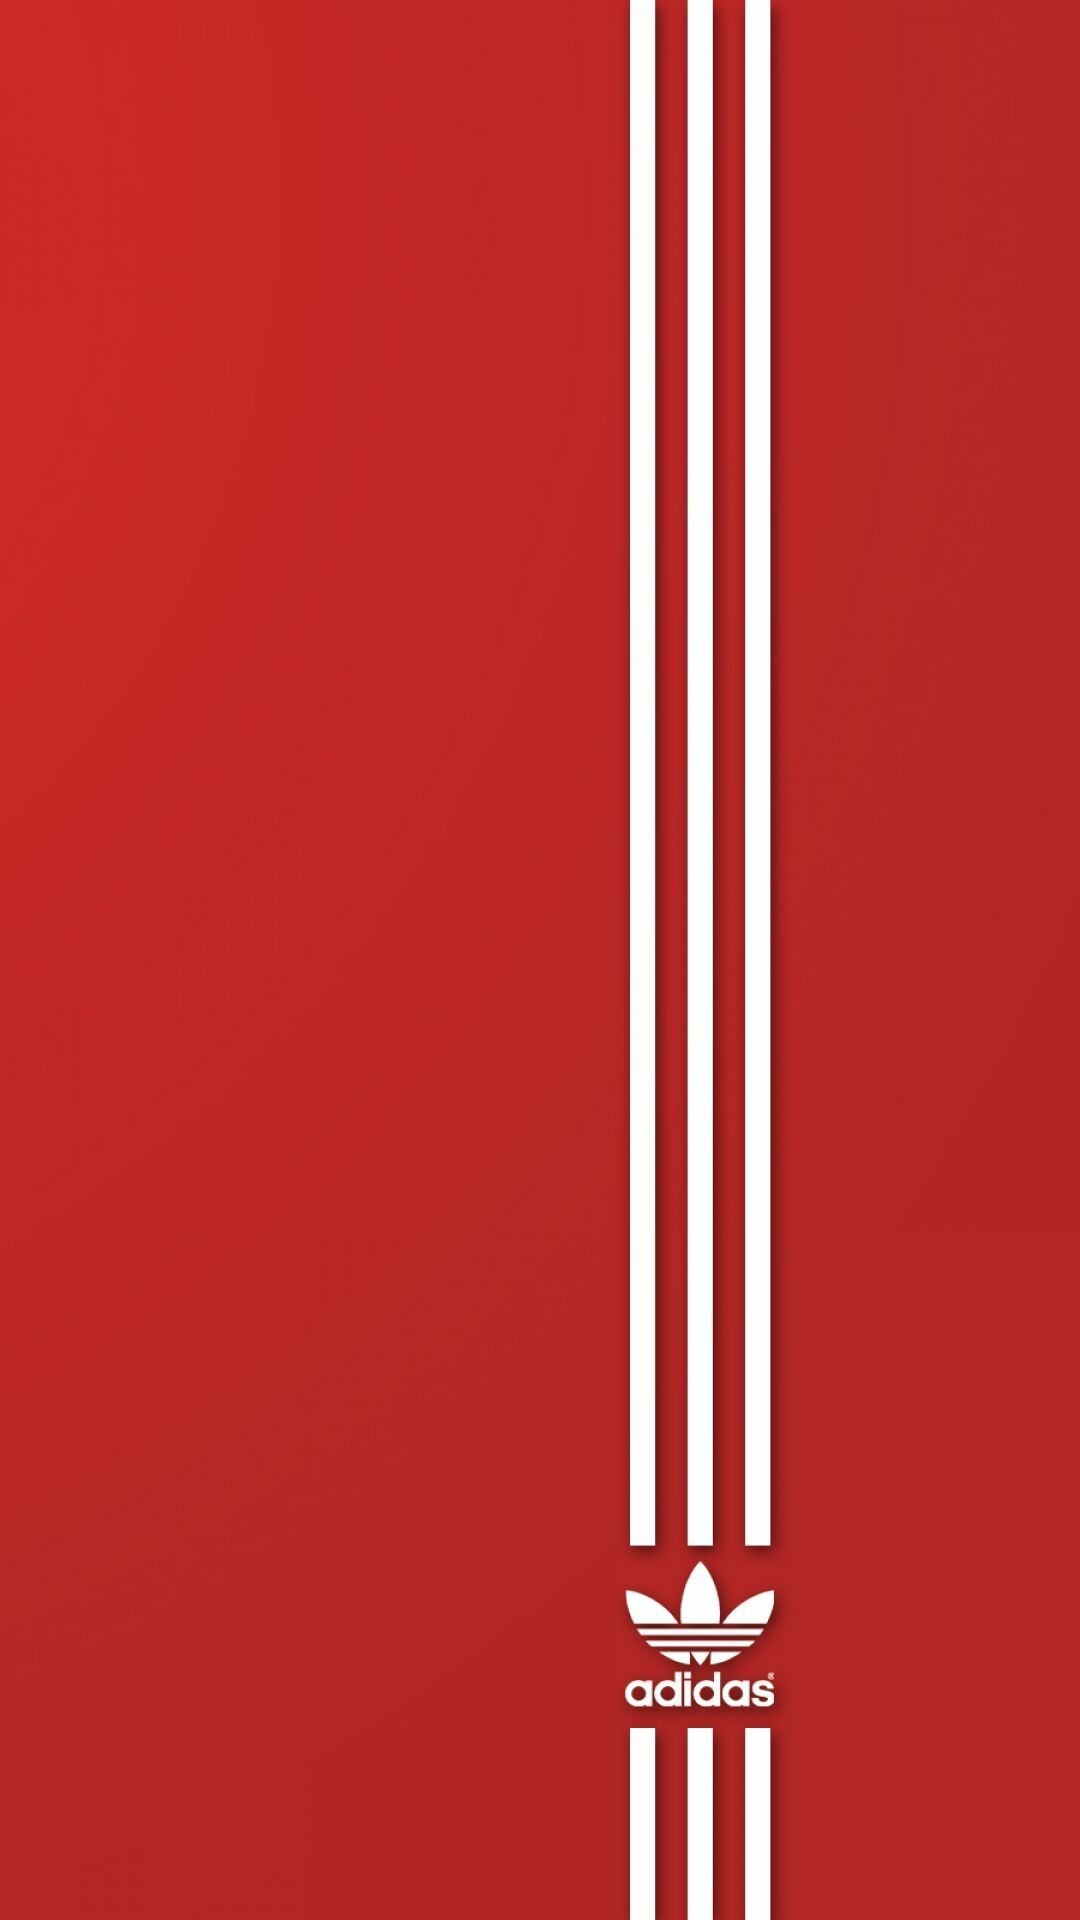 Red Adidas Wallpapers, Red Adidas Backgrounds, Red, Adidas, 1080x1920 Full HD Phone